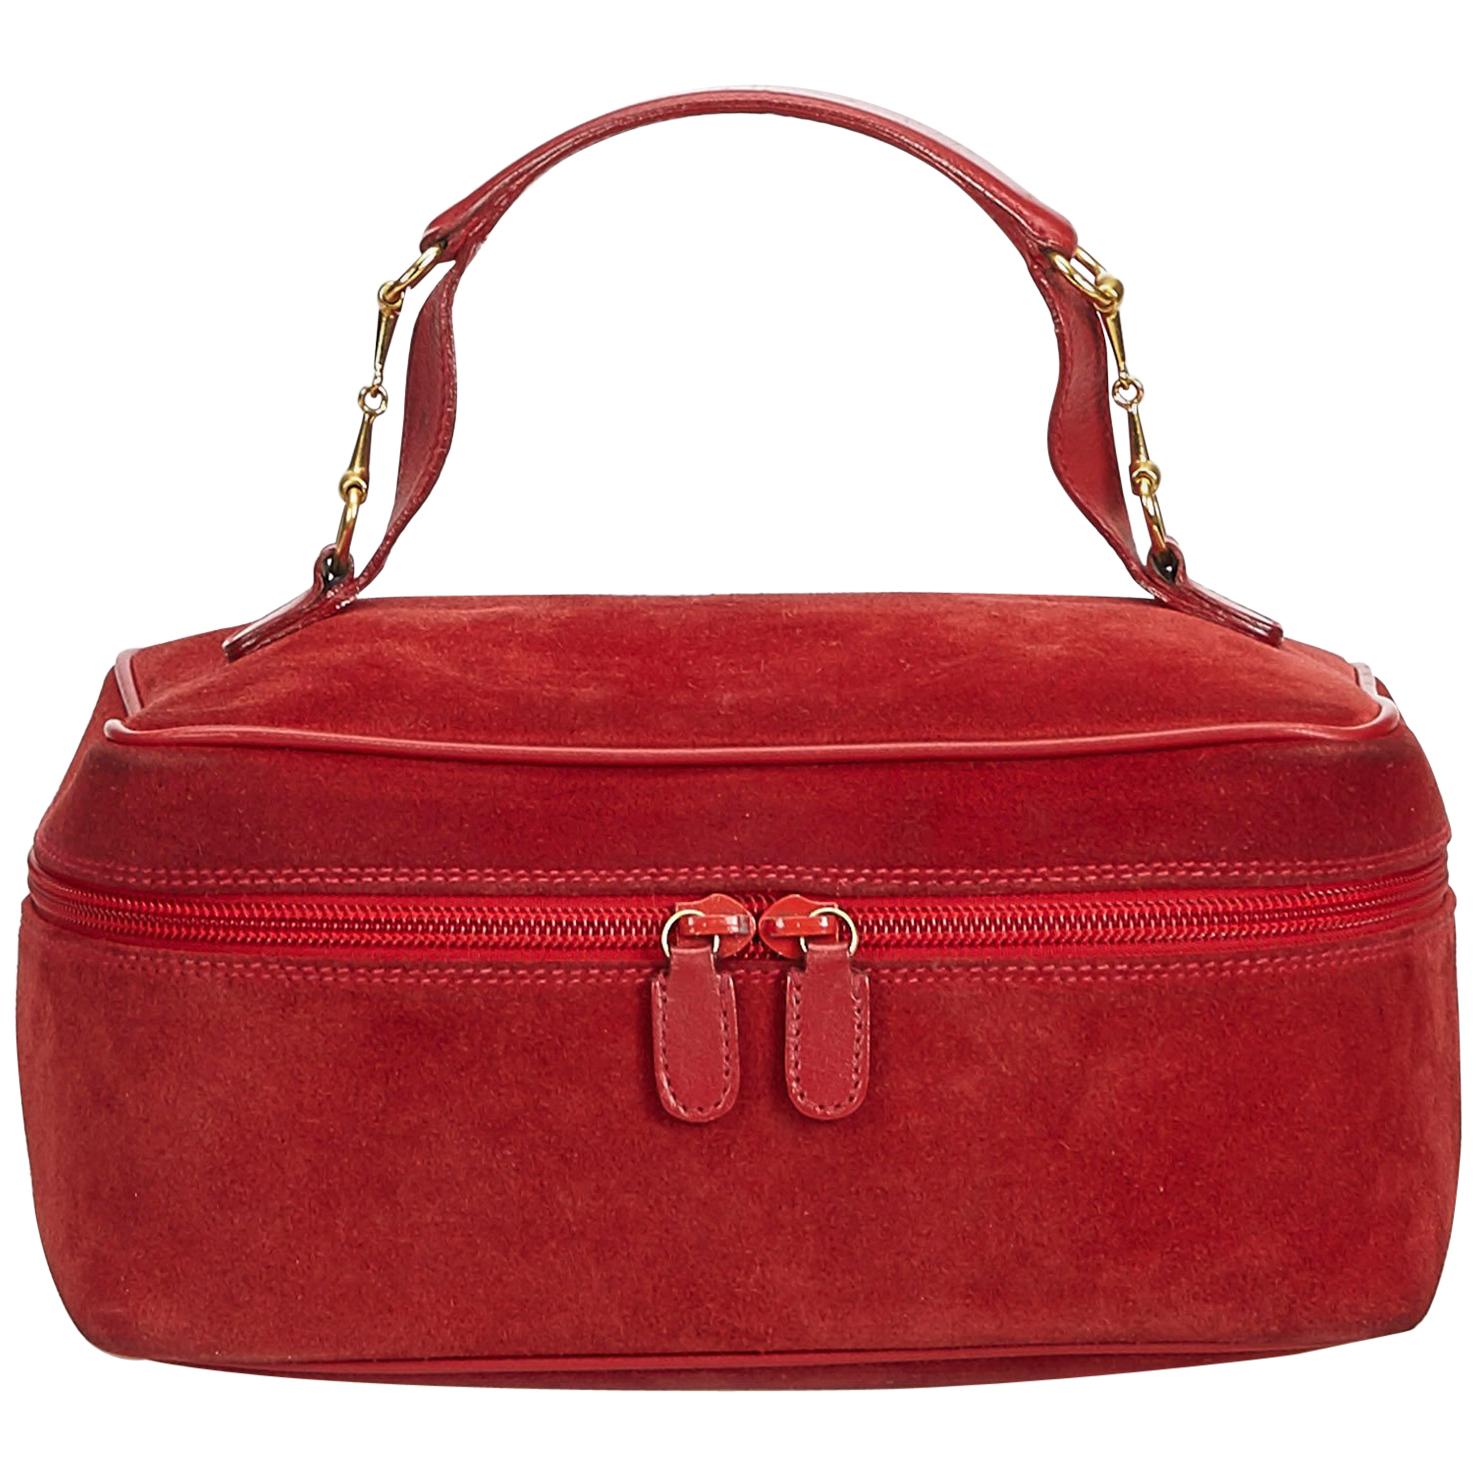 Gucci Red Leather Vanity Bag For Sale